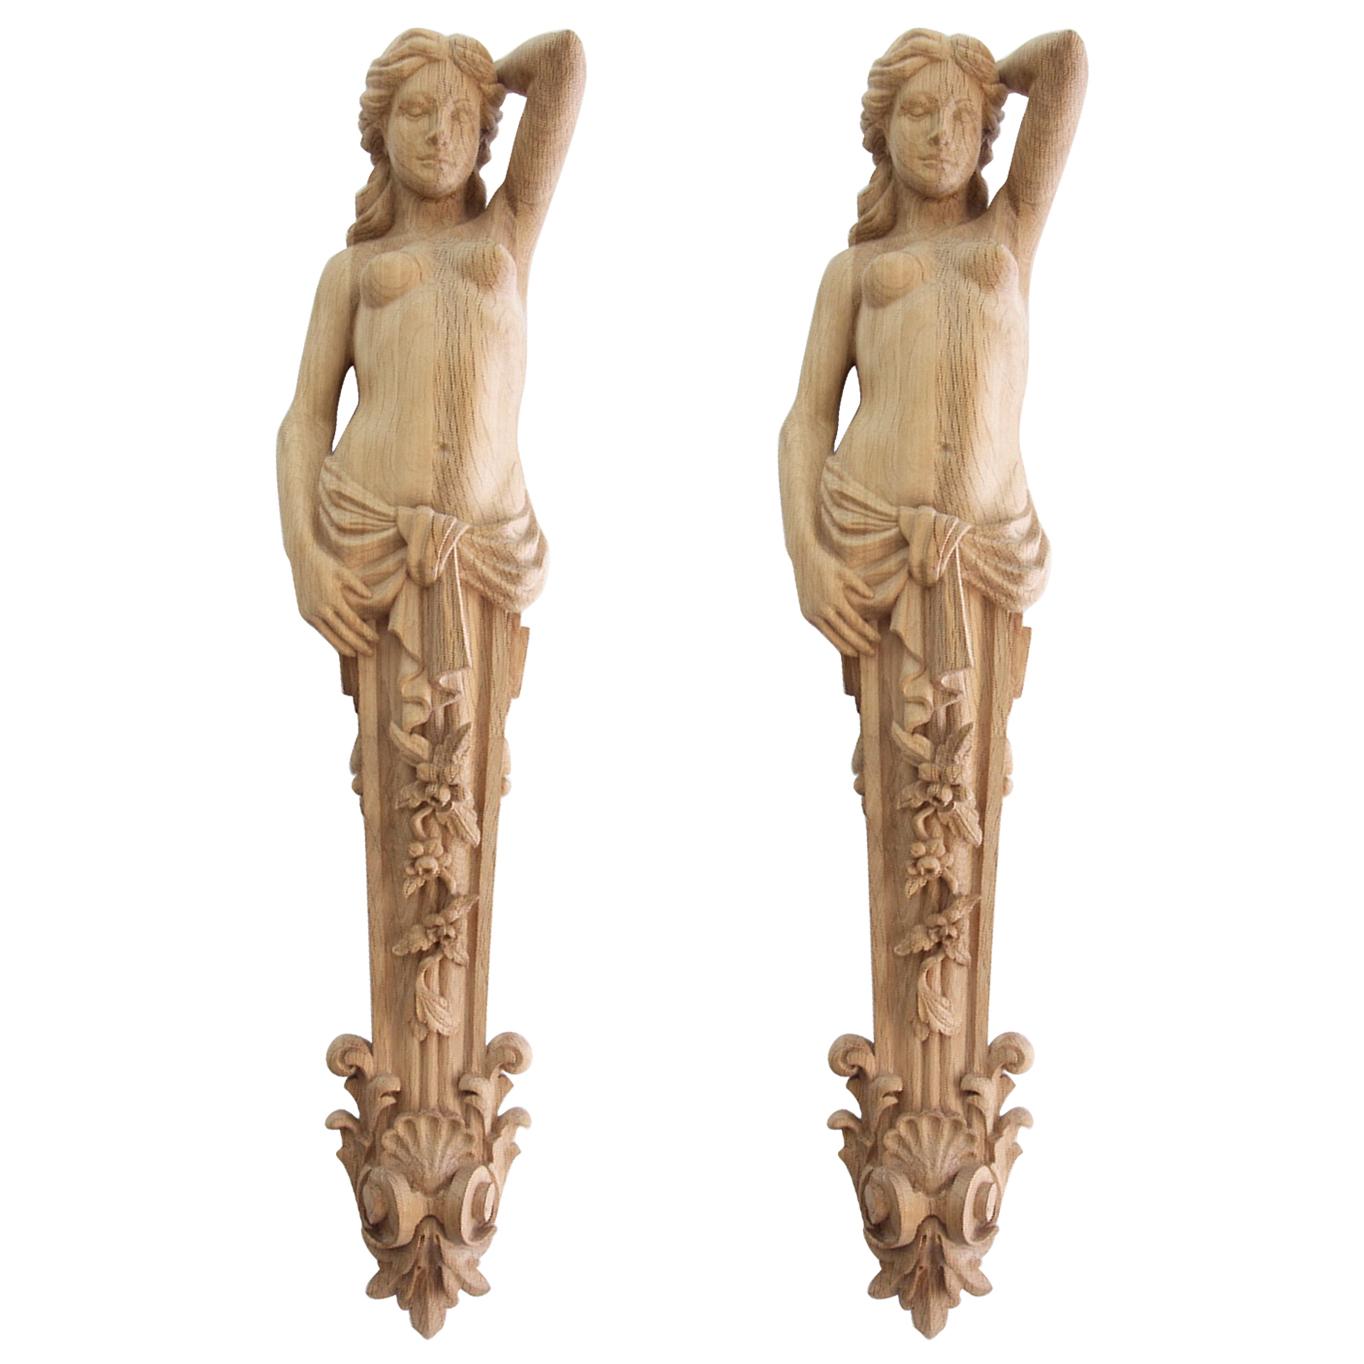 Pair of Carved Wooden Corbels "Caryatid" For Sale